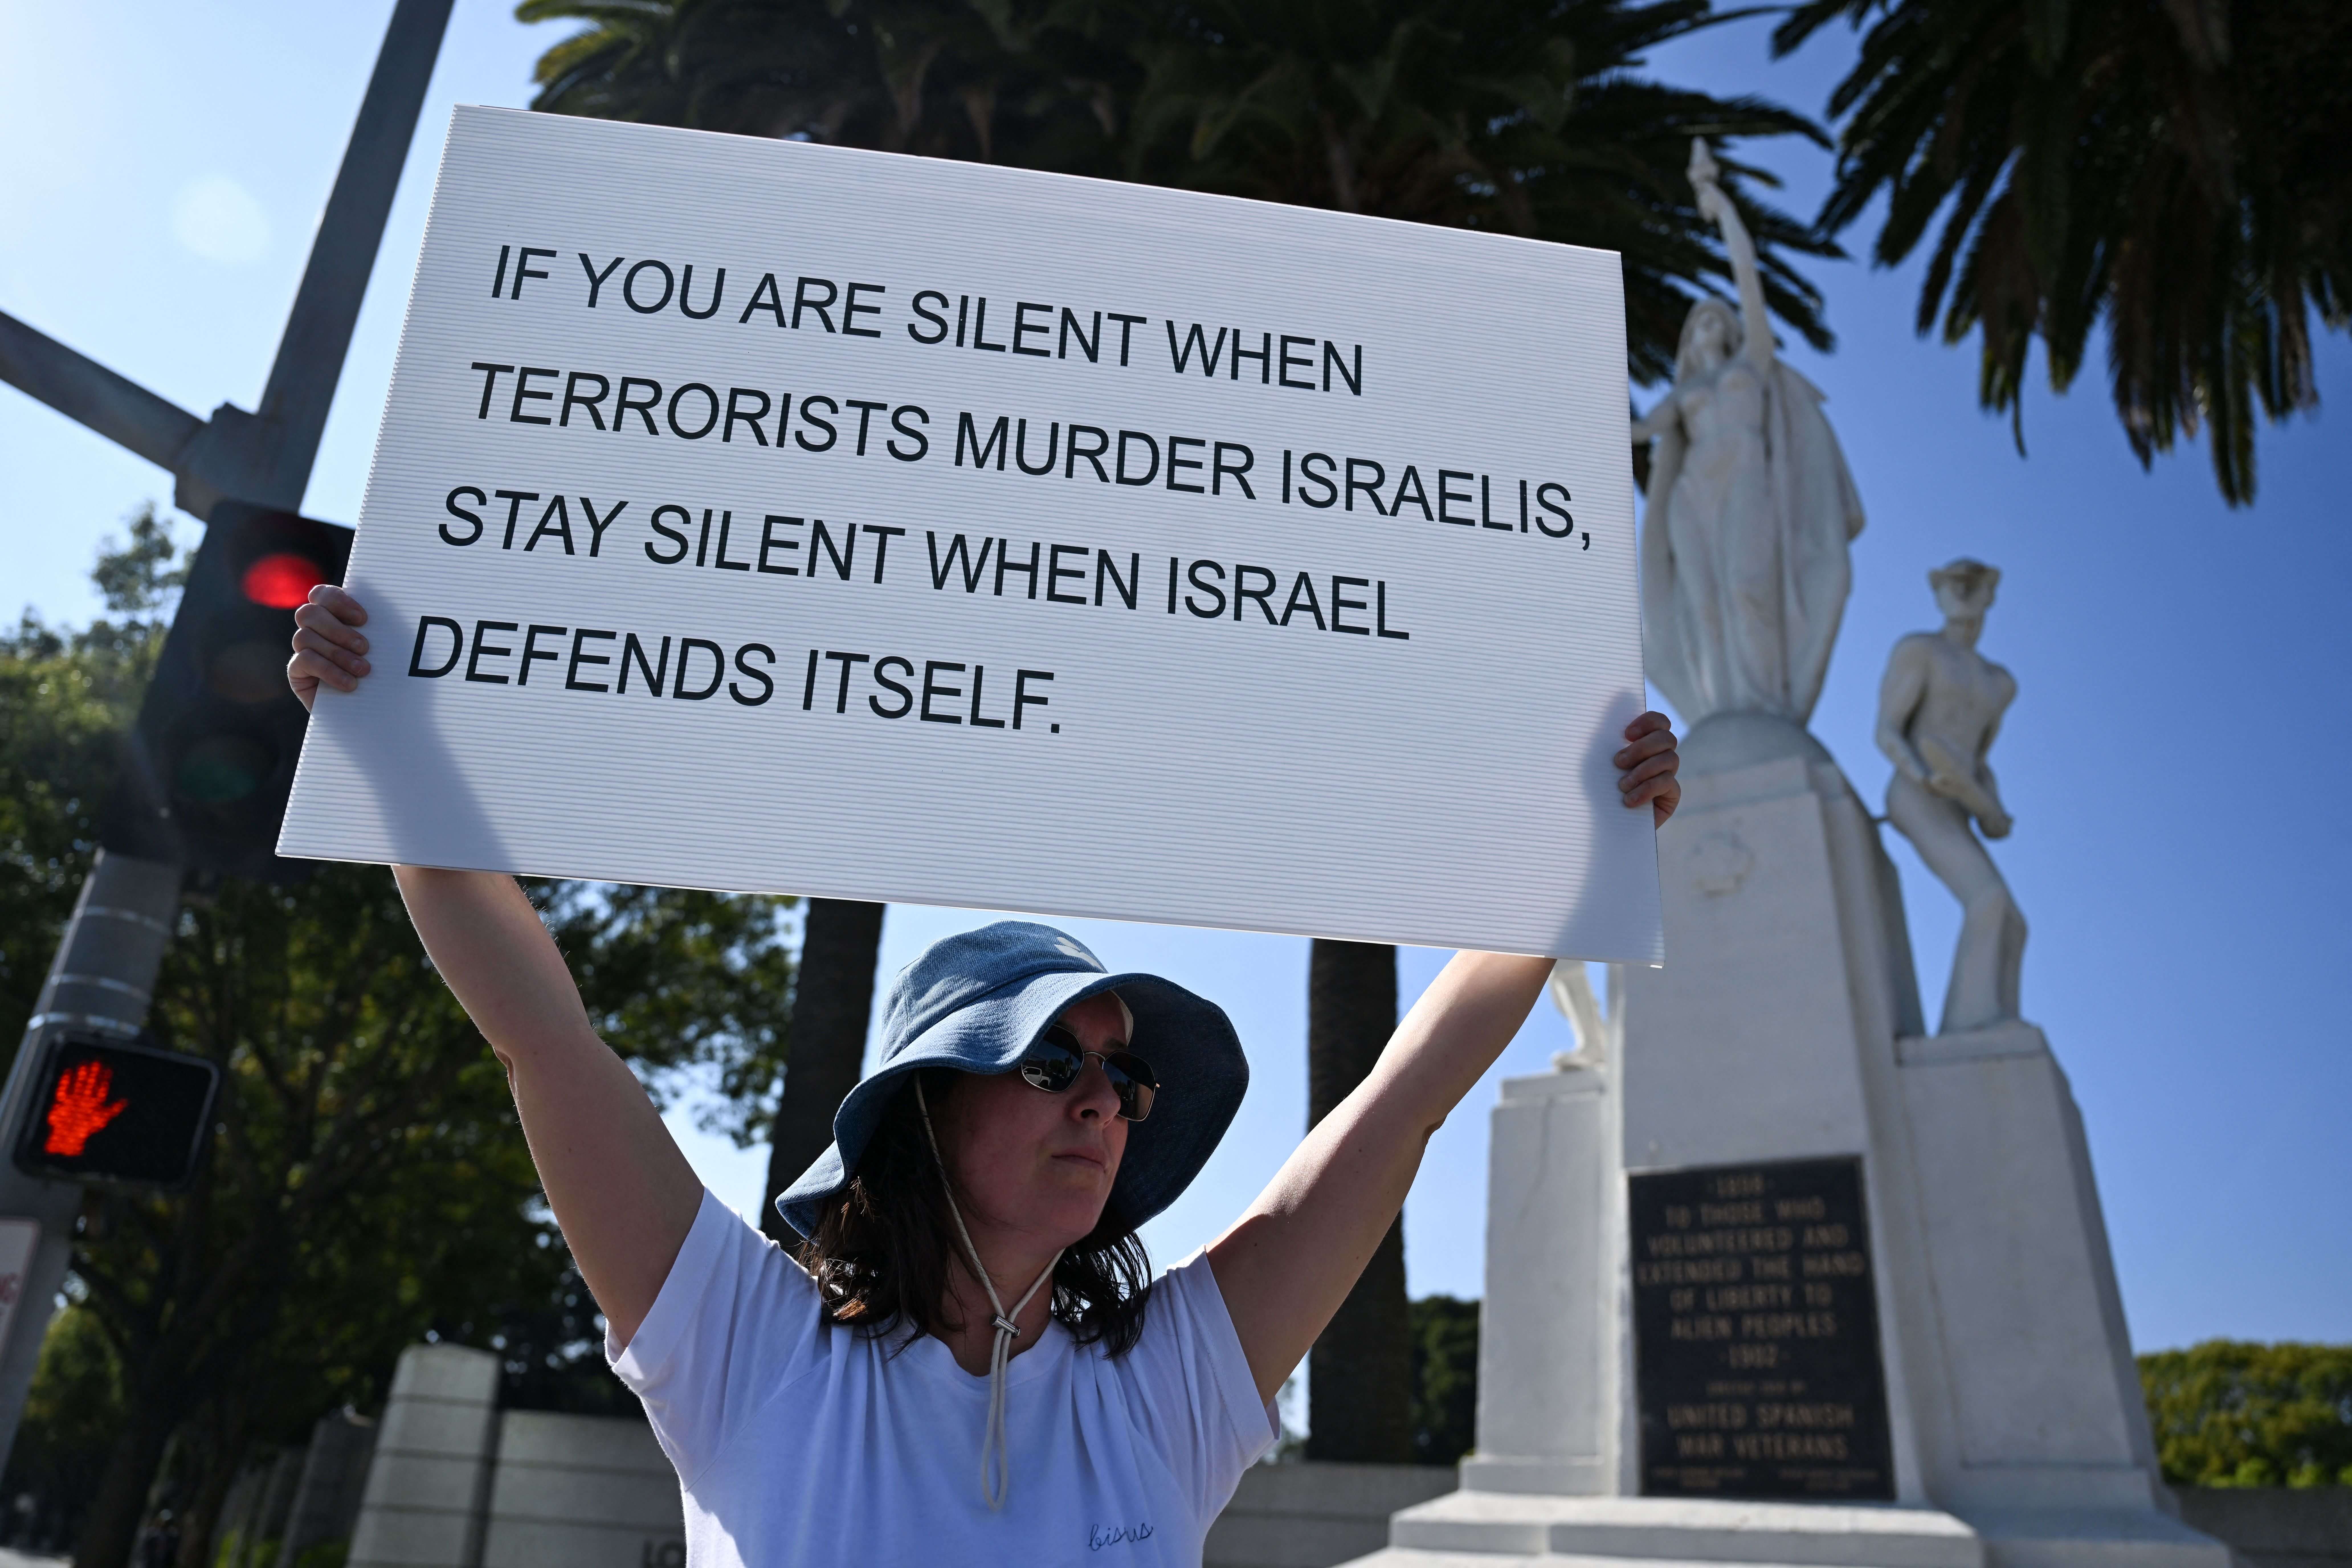 israel-support-protest-sign-hero.jpg?_t=